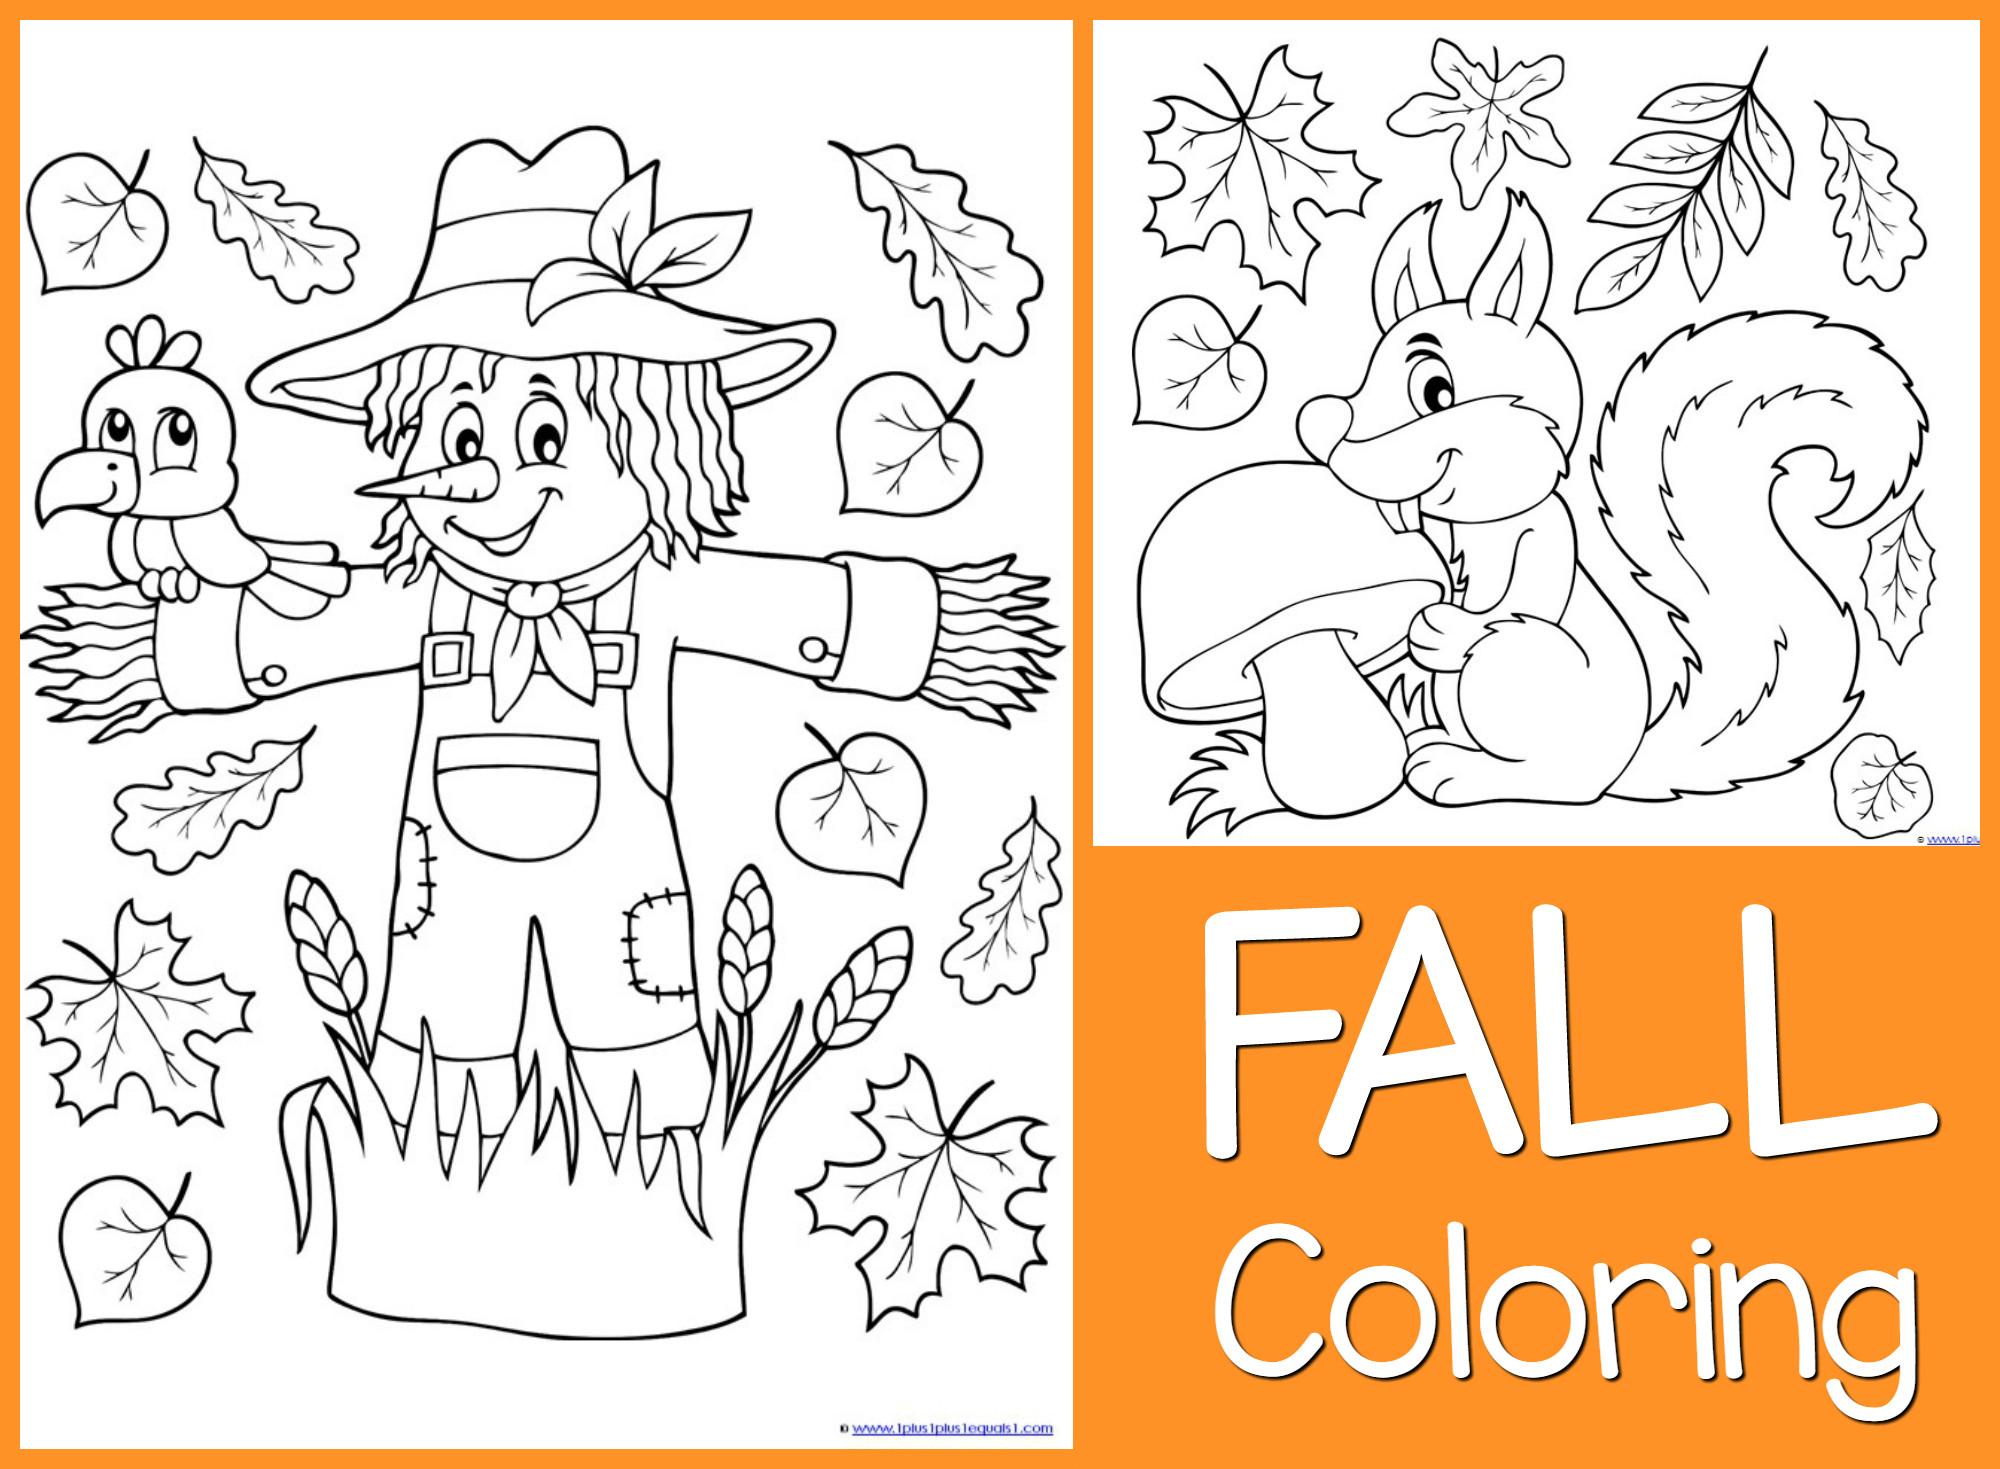 Free Printable Fall Coloring Pages
 Just Color Free Coloring Printables